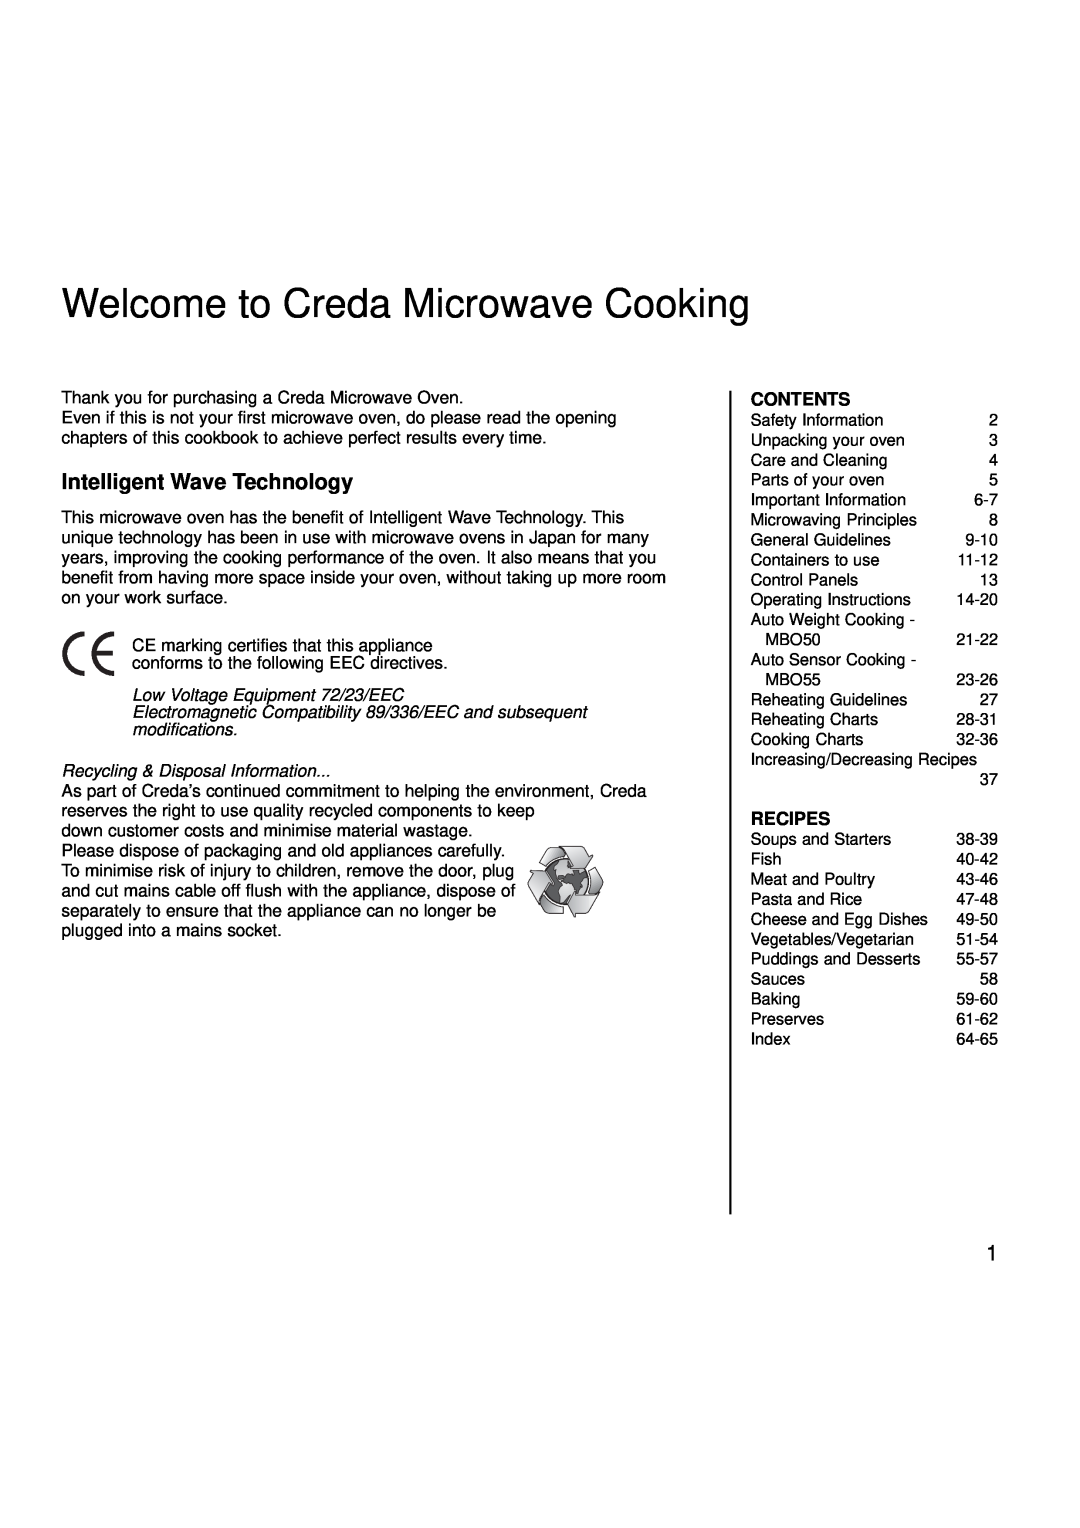 Creda MBO55 manual Welcome to Creda Microwave Cooking, Intelligent Wave Technology, Contents, Recipes 